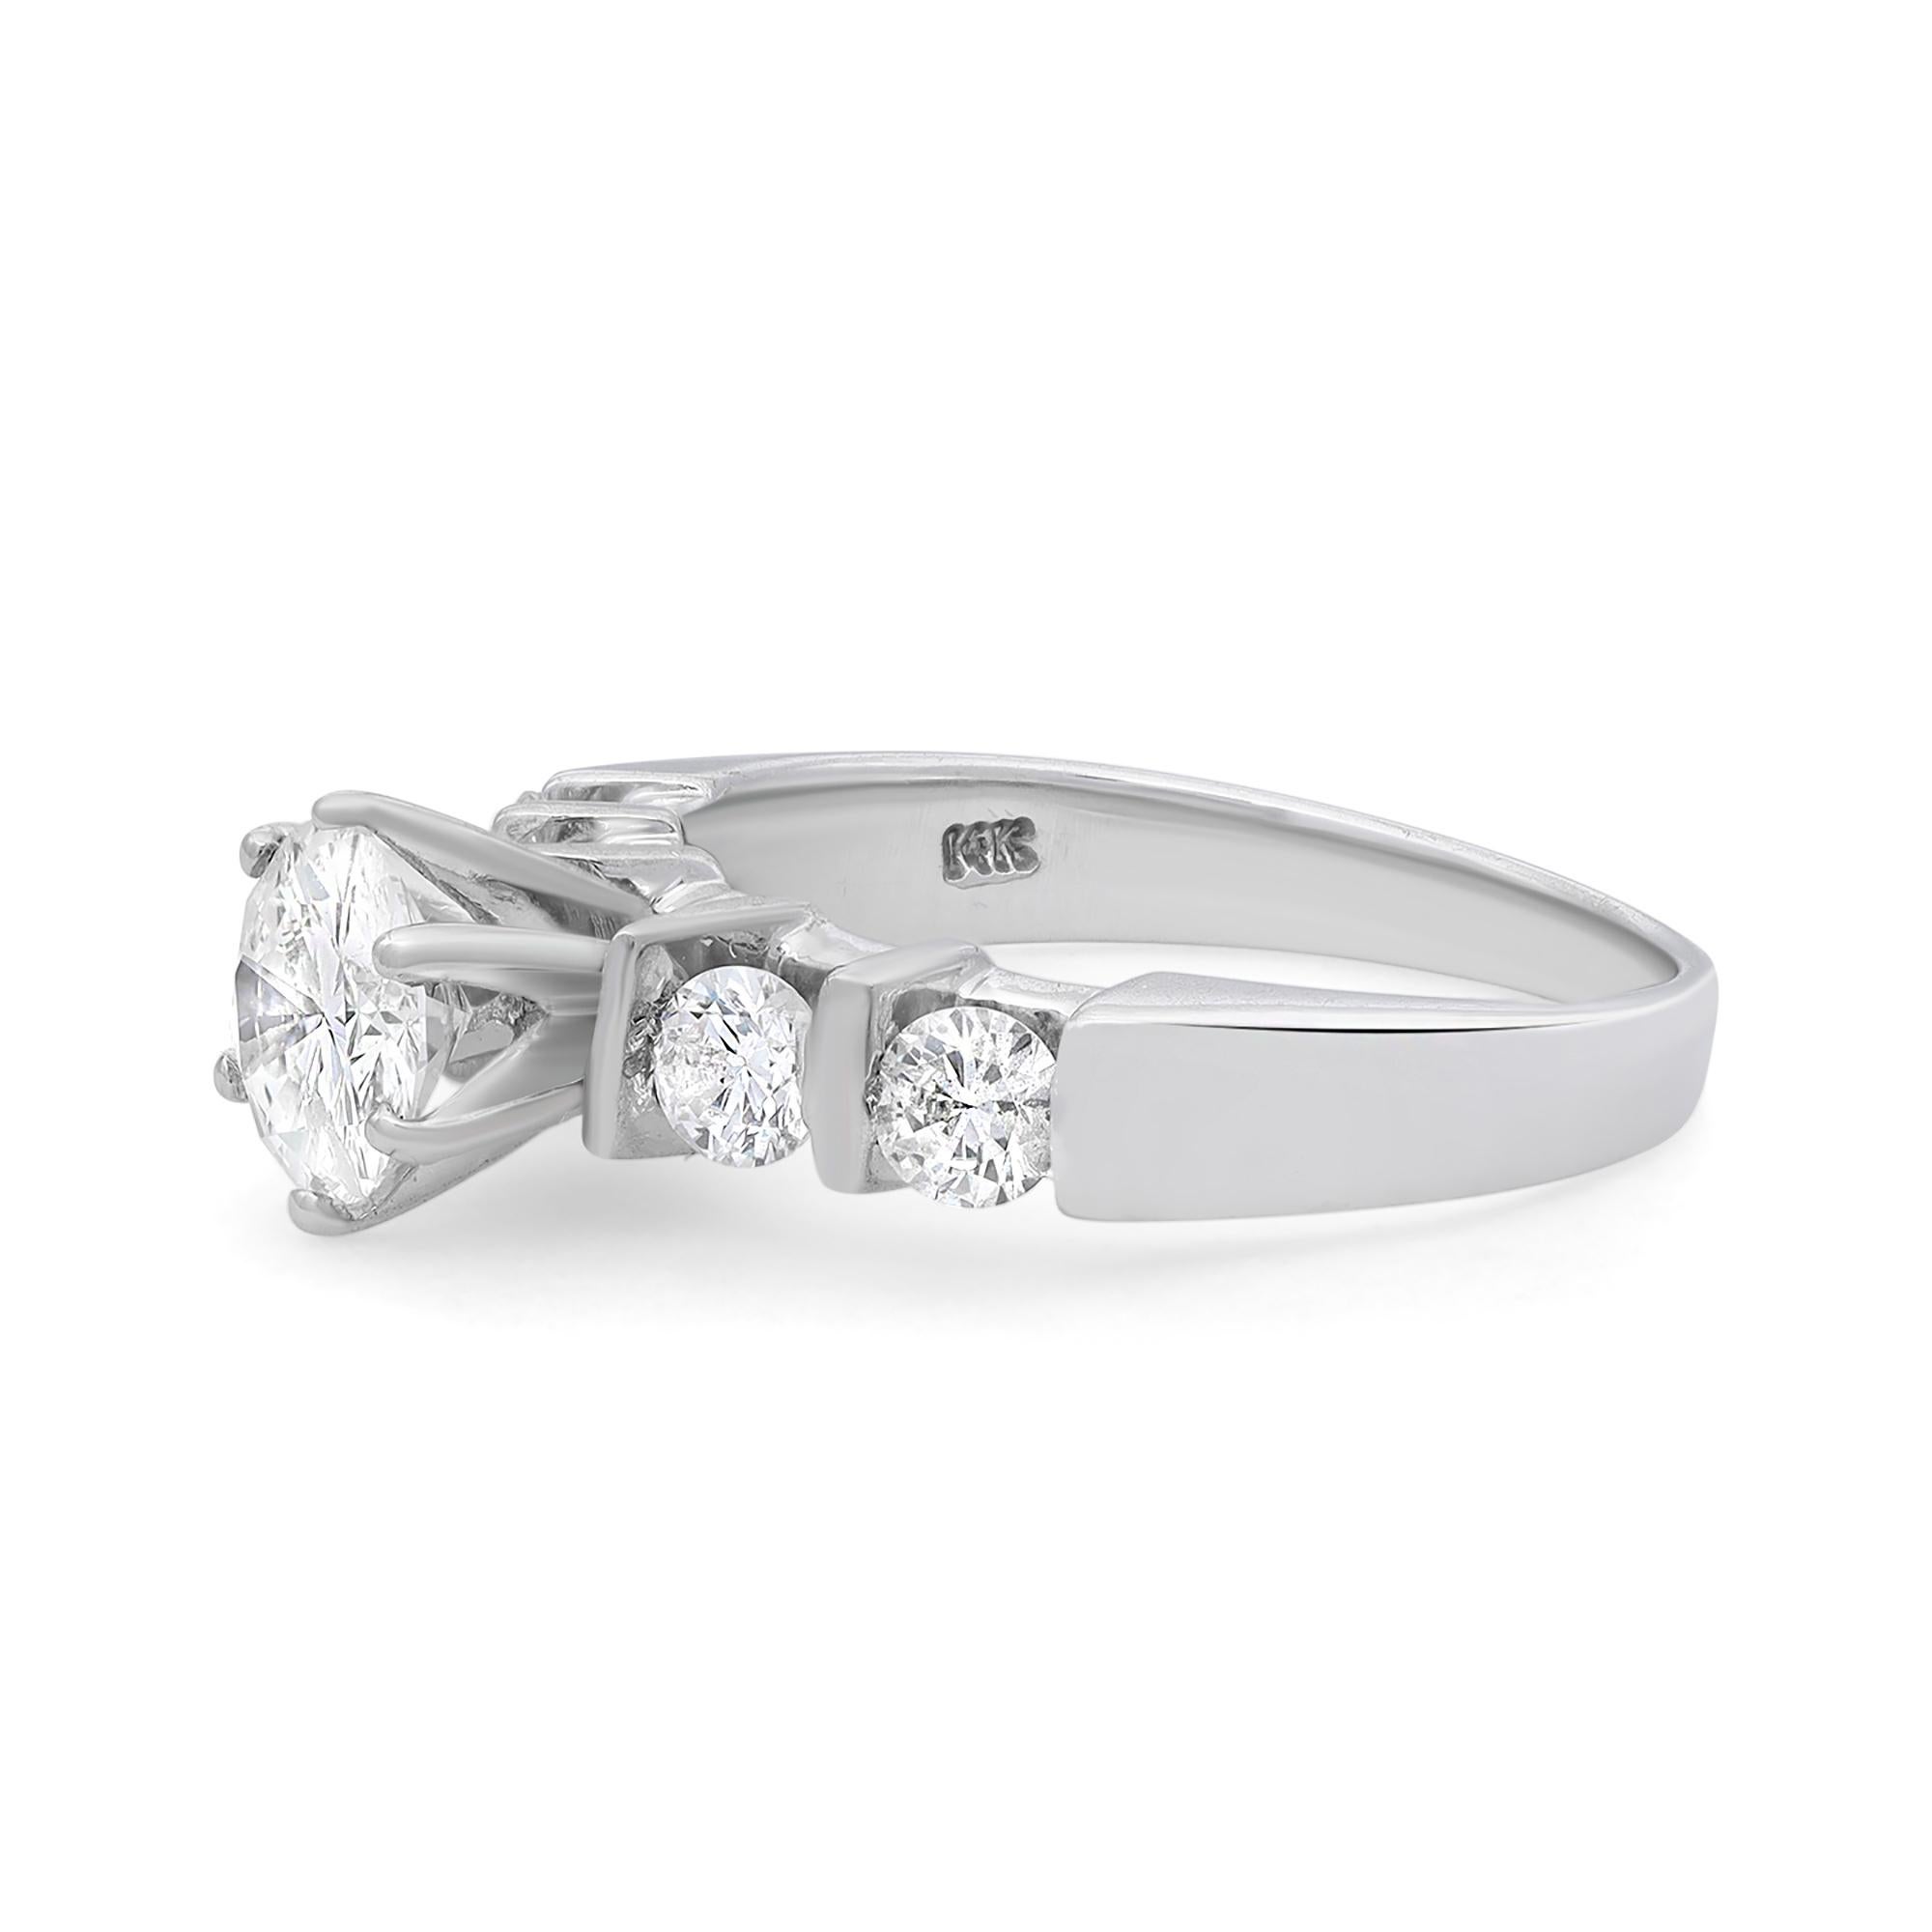 Stunning ladies diamond engagement ring crafted in 14k white gold. This beautiful ring features 0.85 carat of prong set round brilliant cut center diamond with round cut side diamonds weighing 0.50 carat. Total diamond weight: 1.35 carats. Diamond